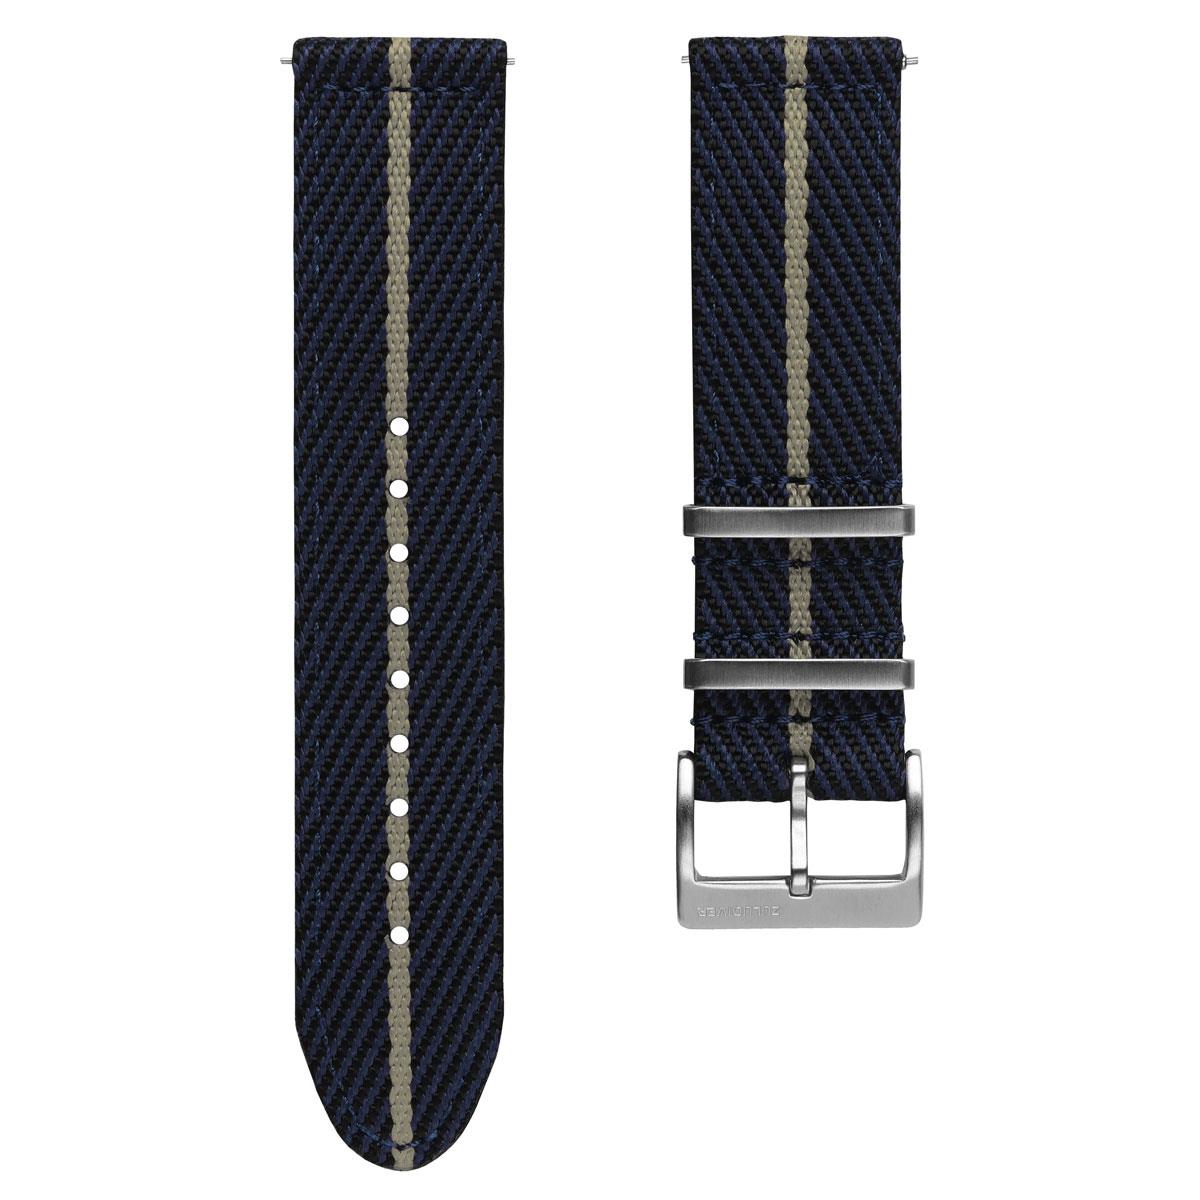 2 piece NATO watch straps with quick release spring bars